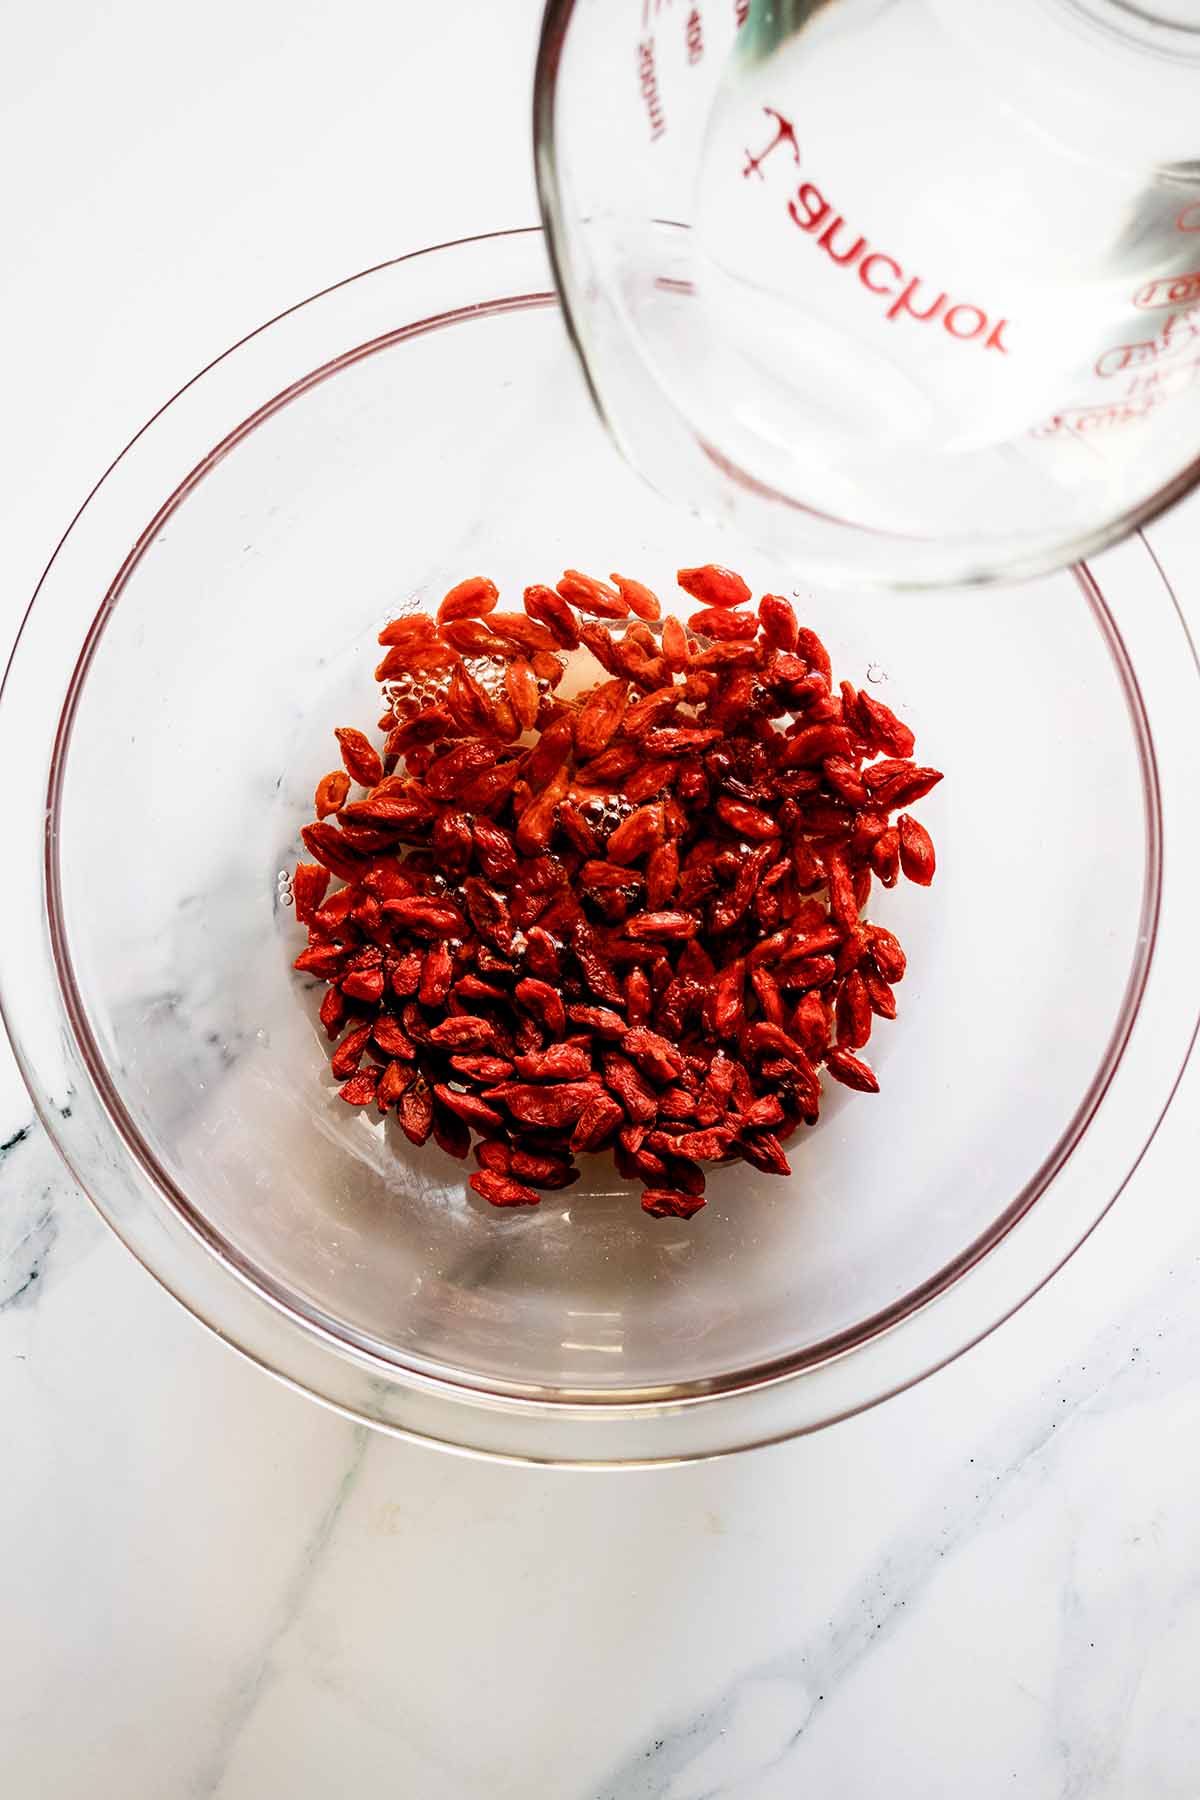 Overhead view of water being added to goji berries in a glass bowl